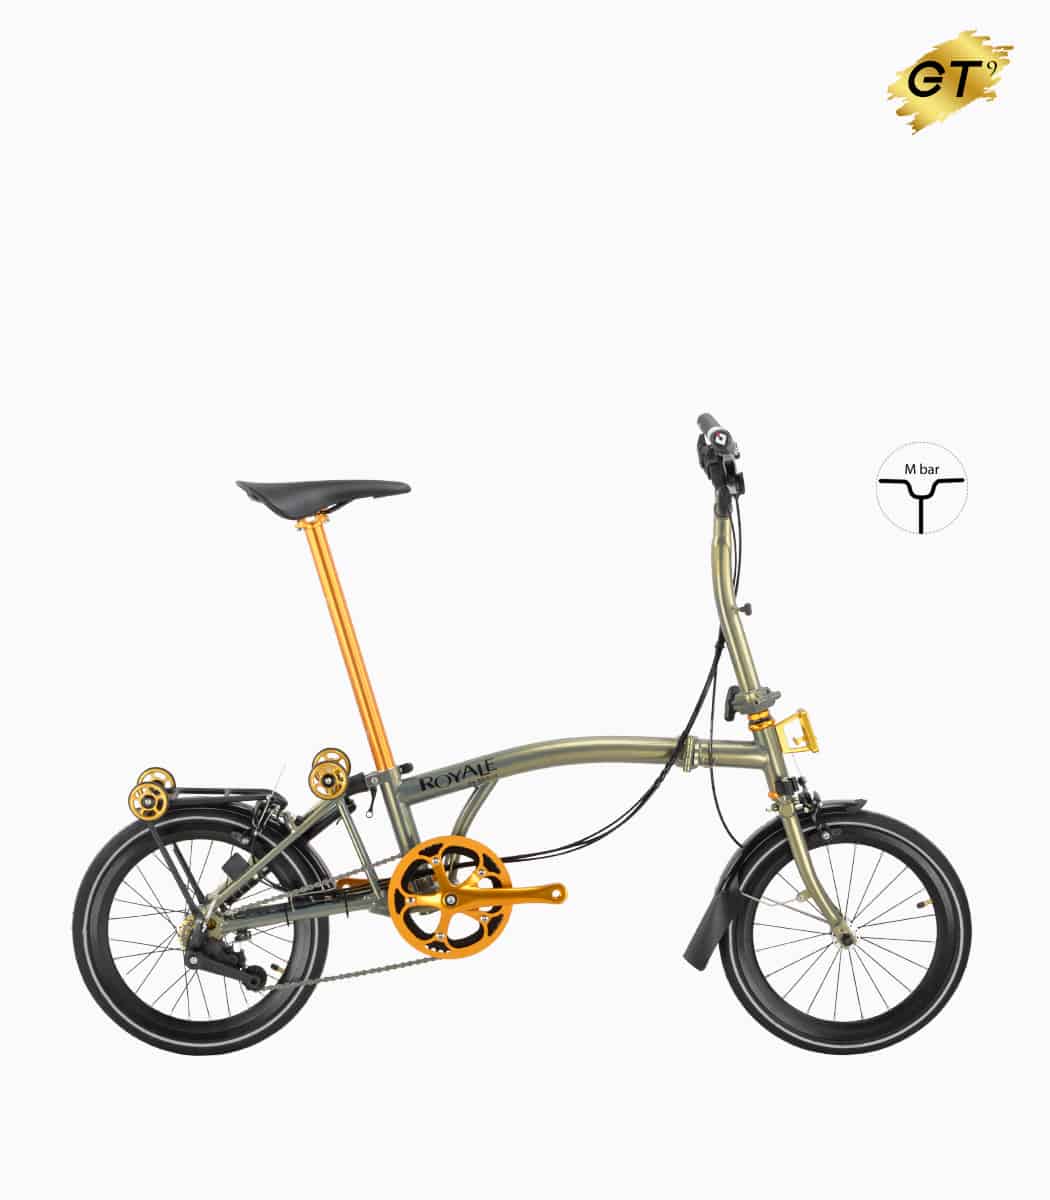 MOBOT ROYALE GT M9 (SANDSTONE) foldable bicycle gold edition right